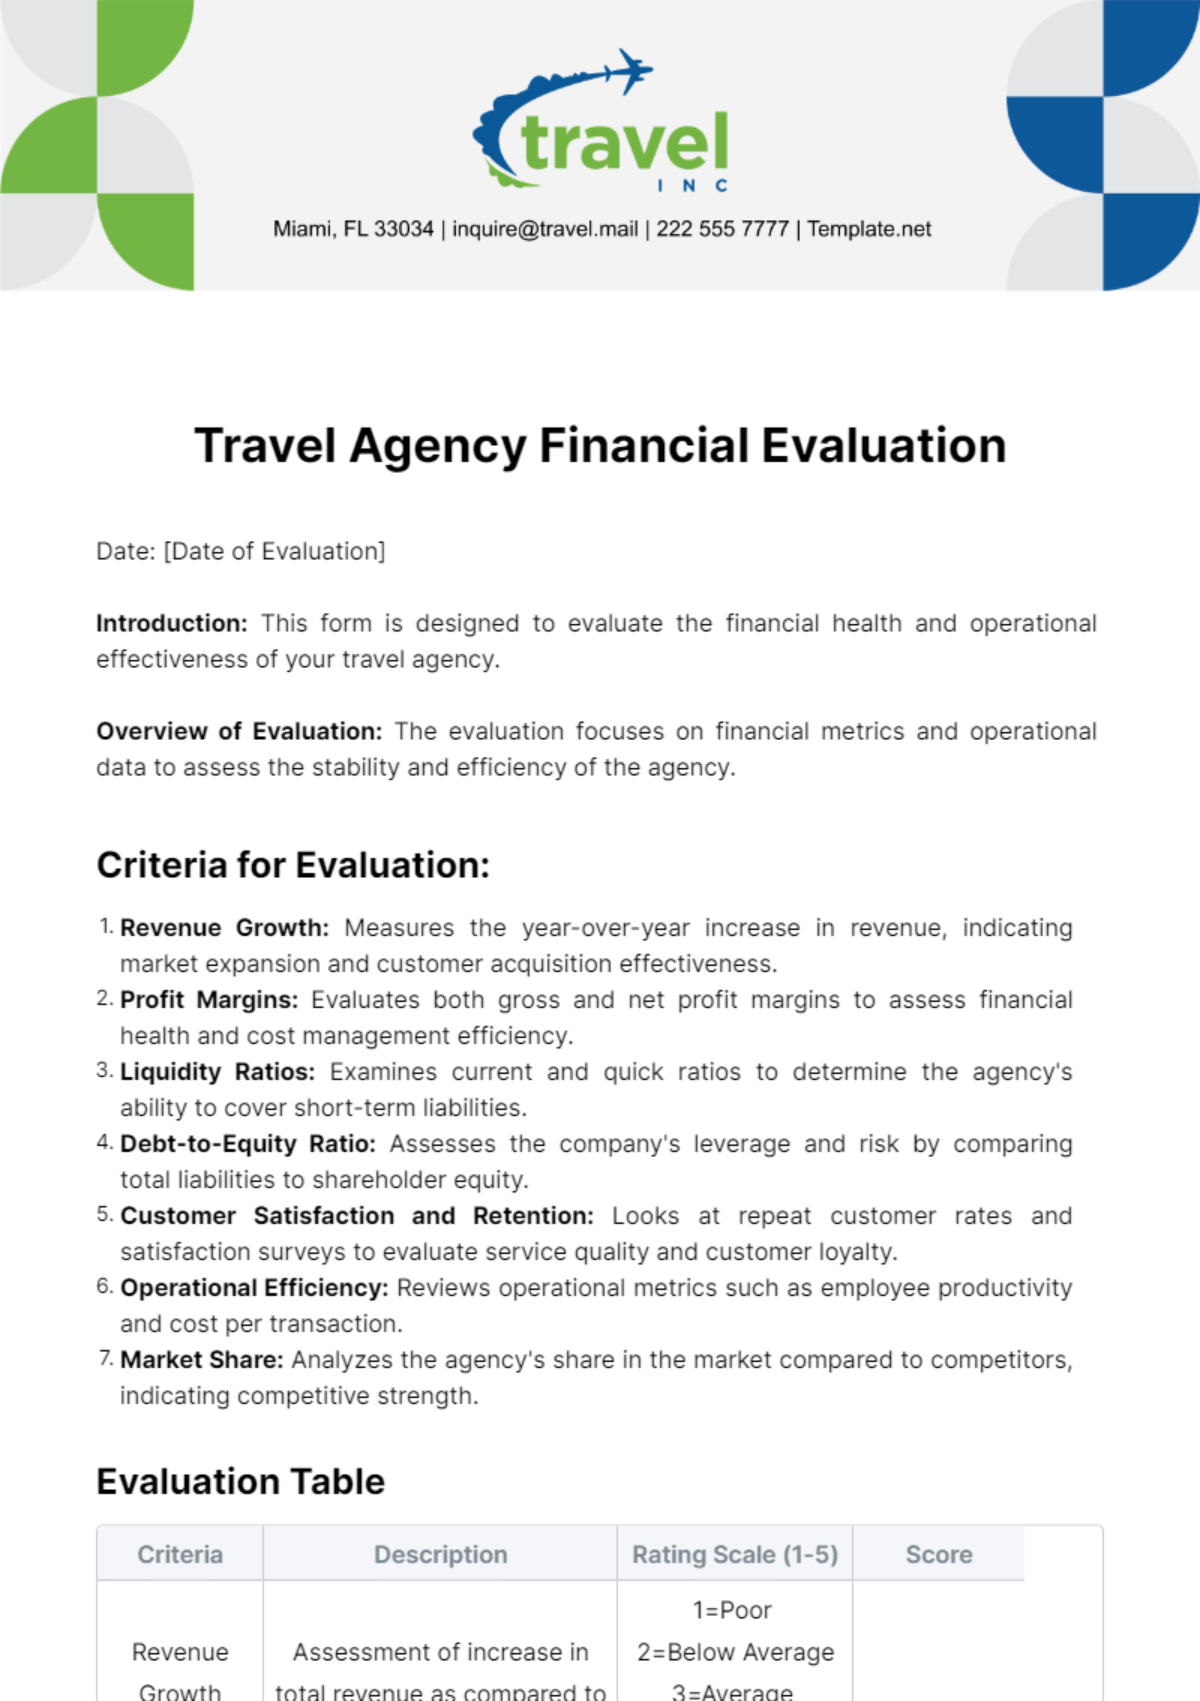 Free Travel Agency Financial Evaluation Template